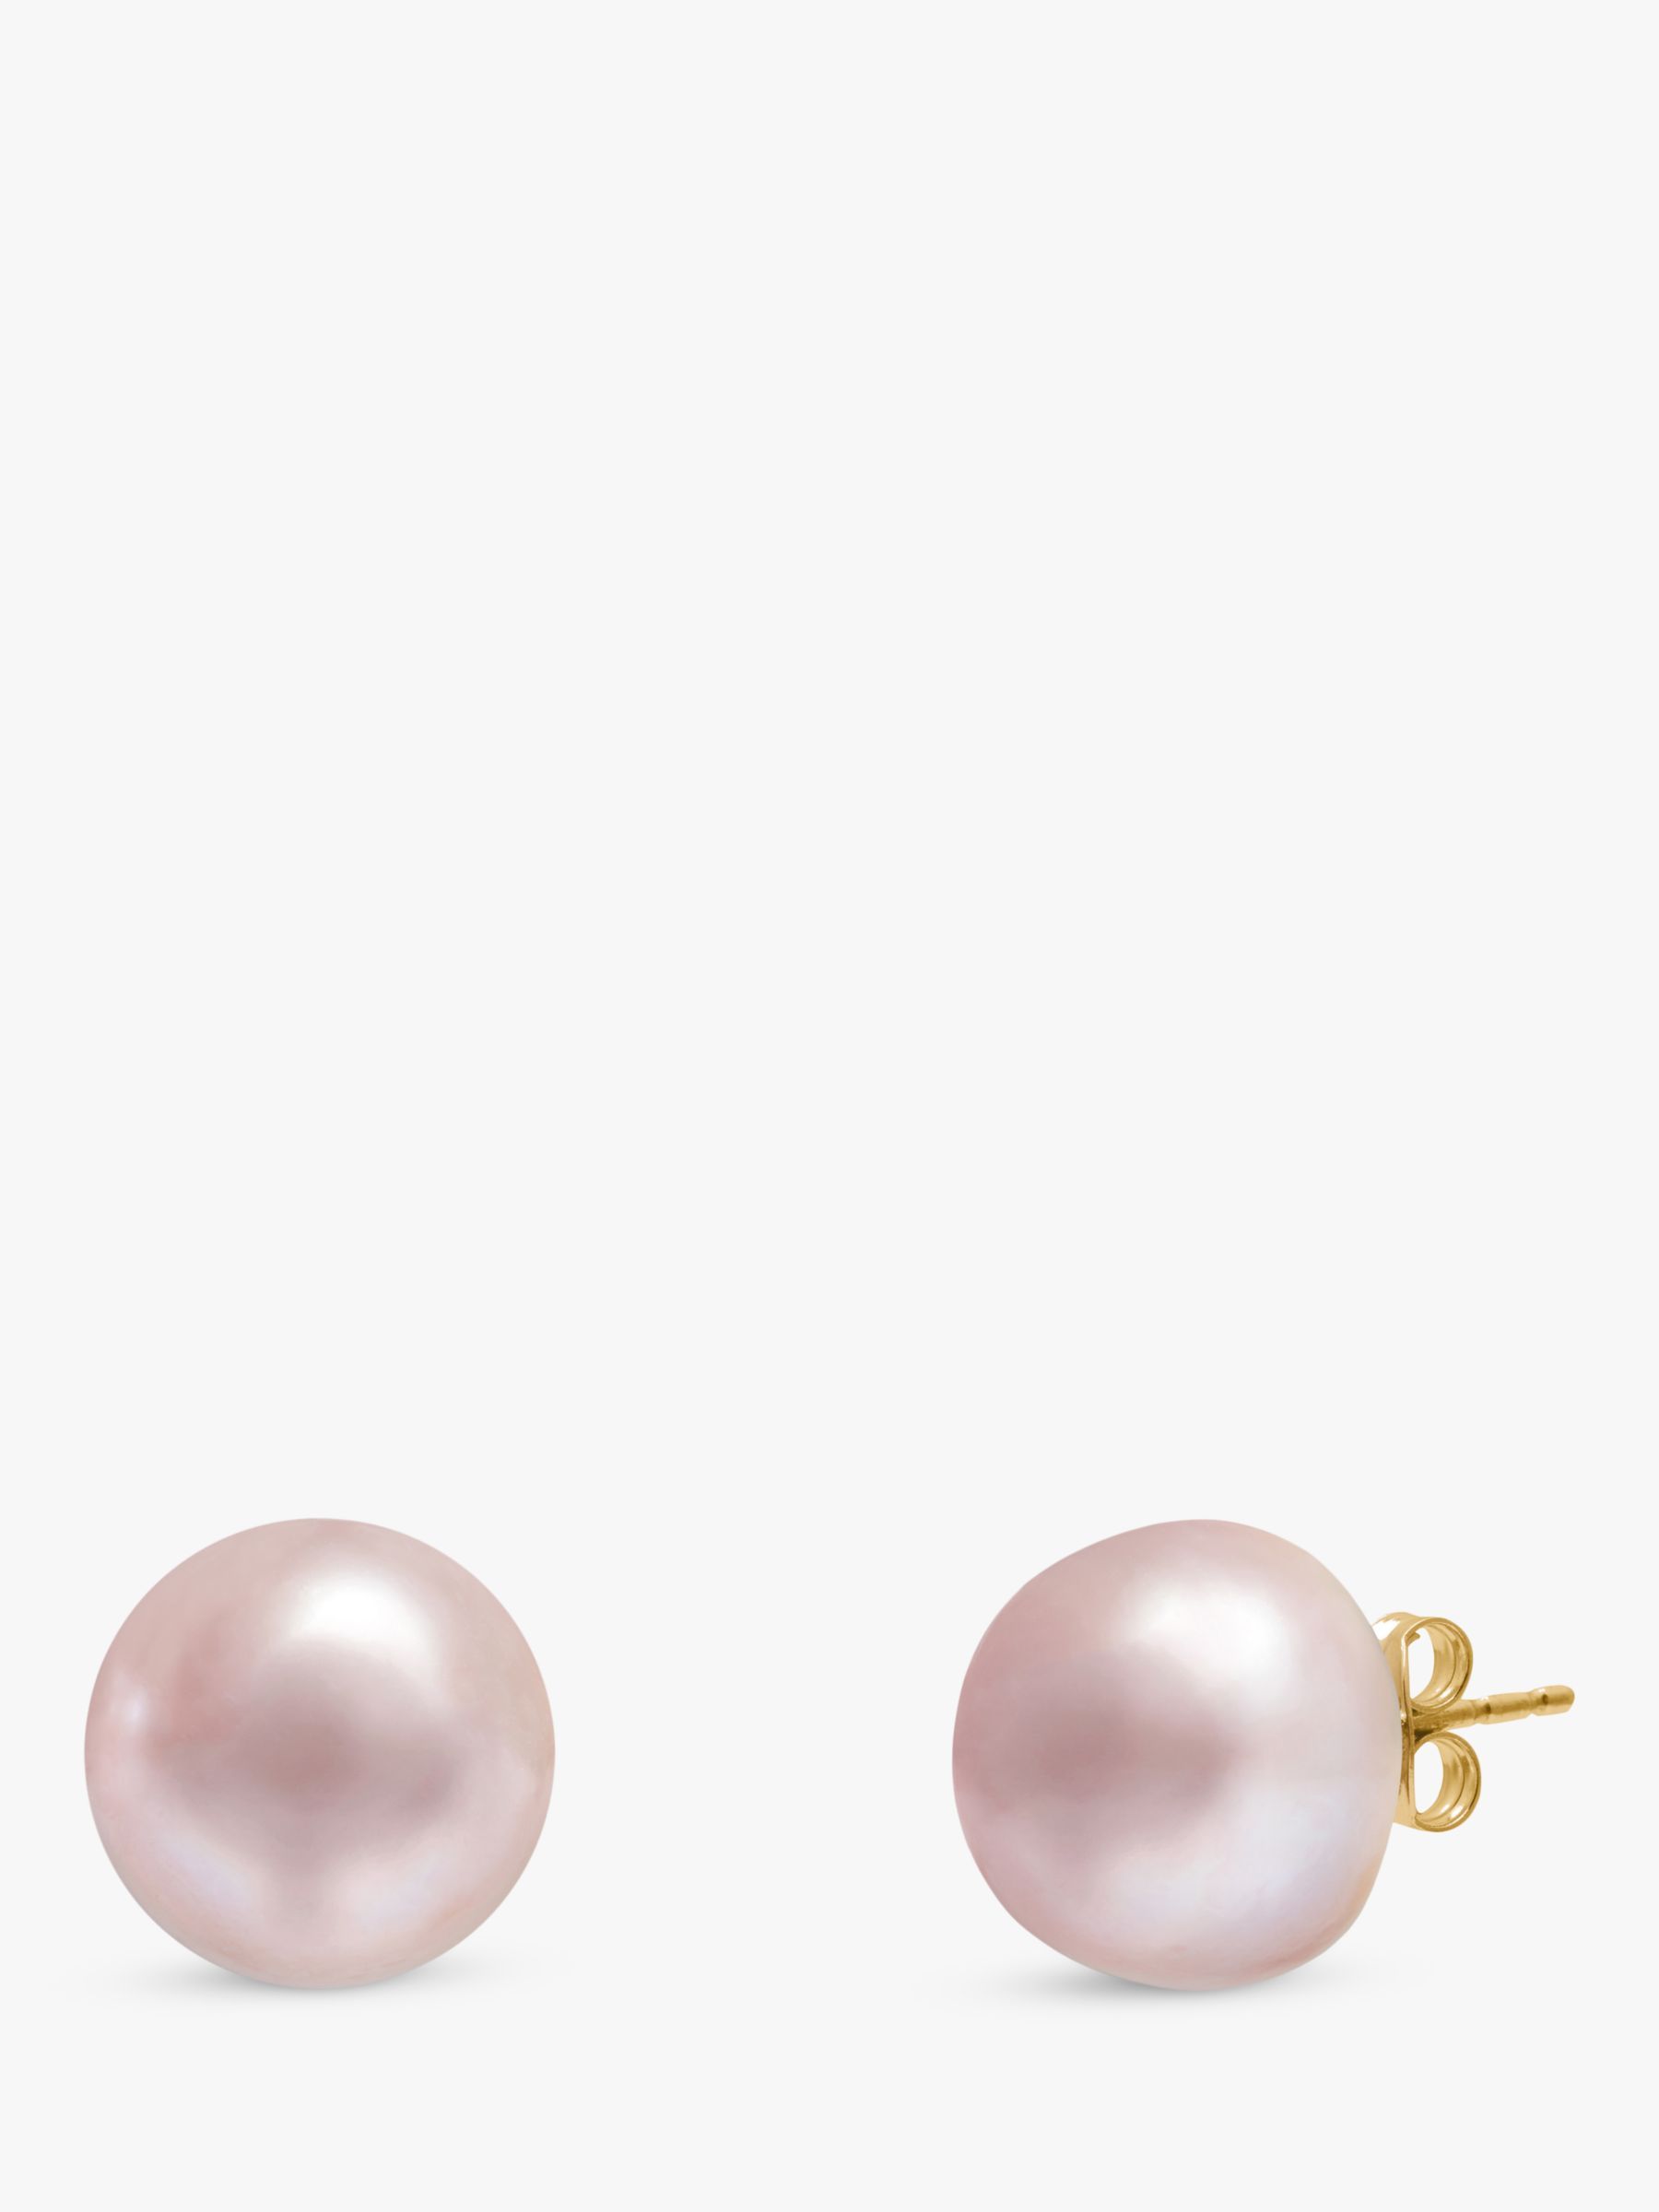 Buy A B Davis 9ct Yellow Gold Bouton Freshwater Pearl Stud Earrings Online at johnlewis.com